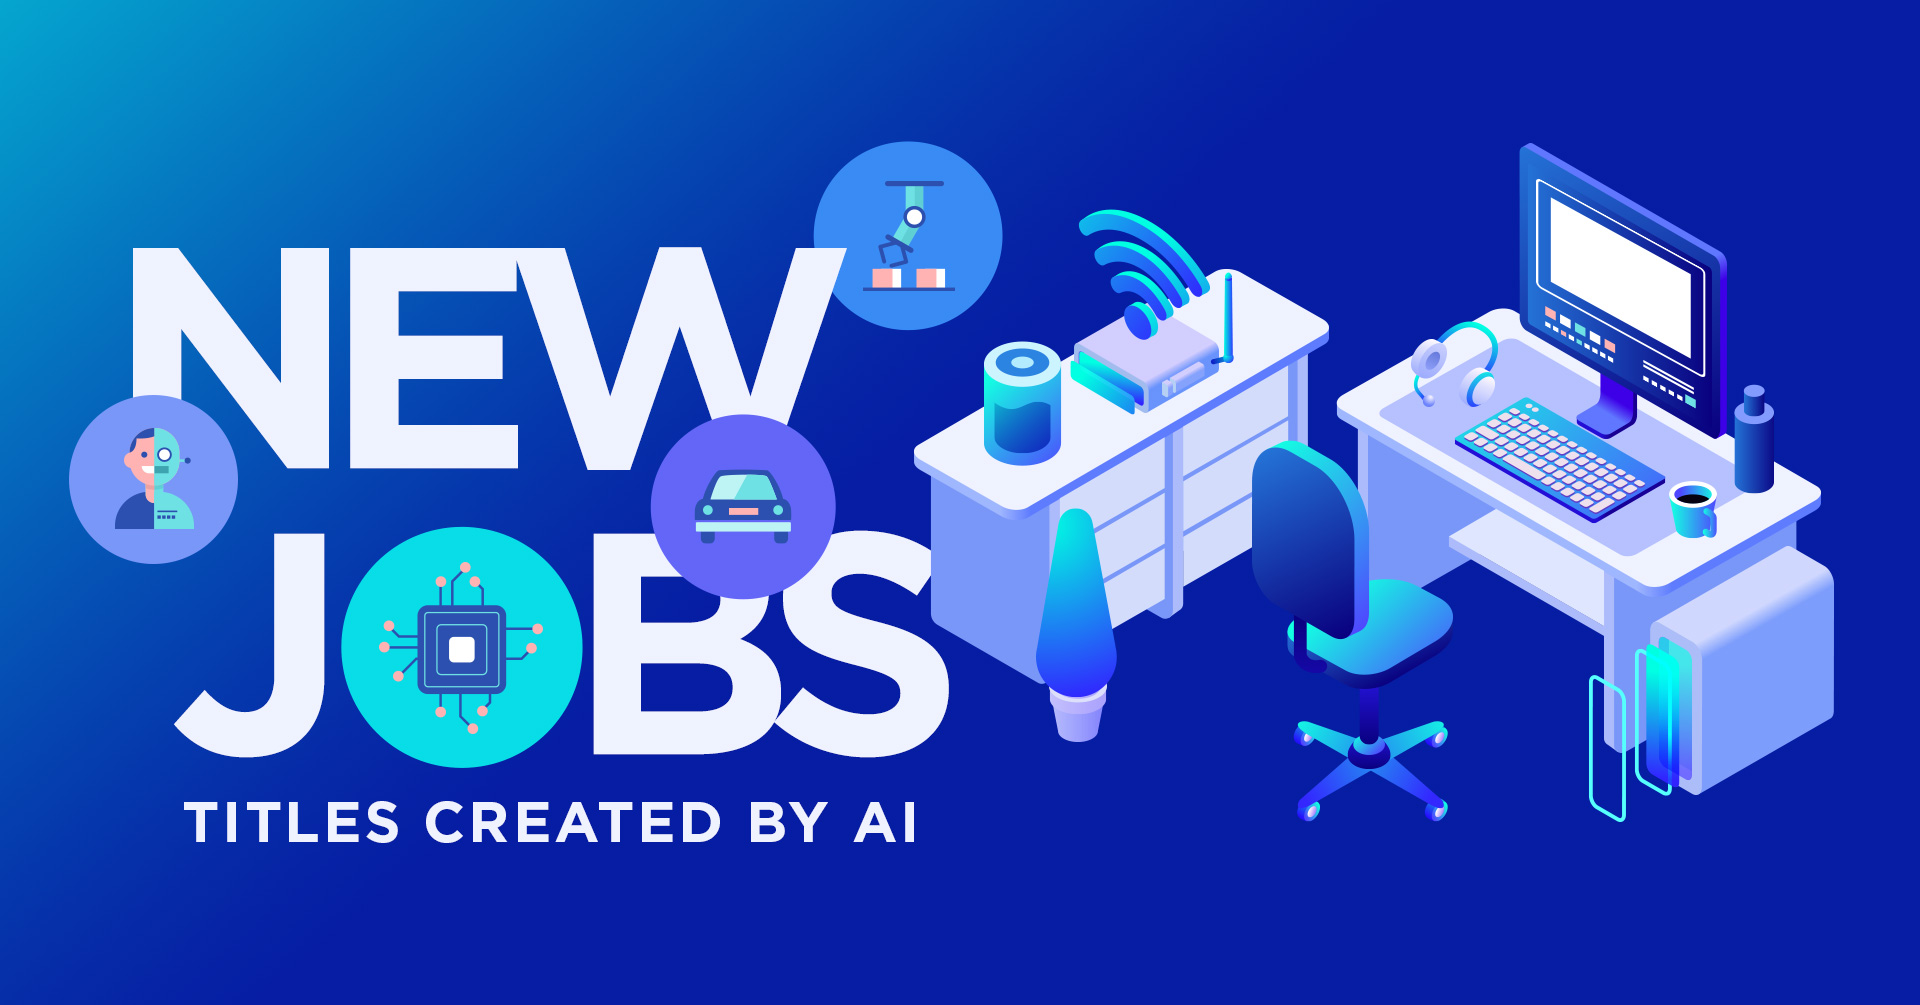 New Job Titles Created by AI